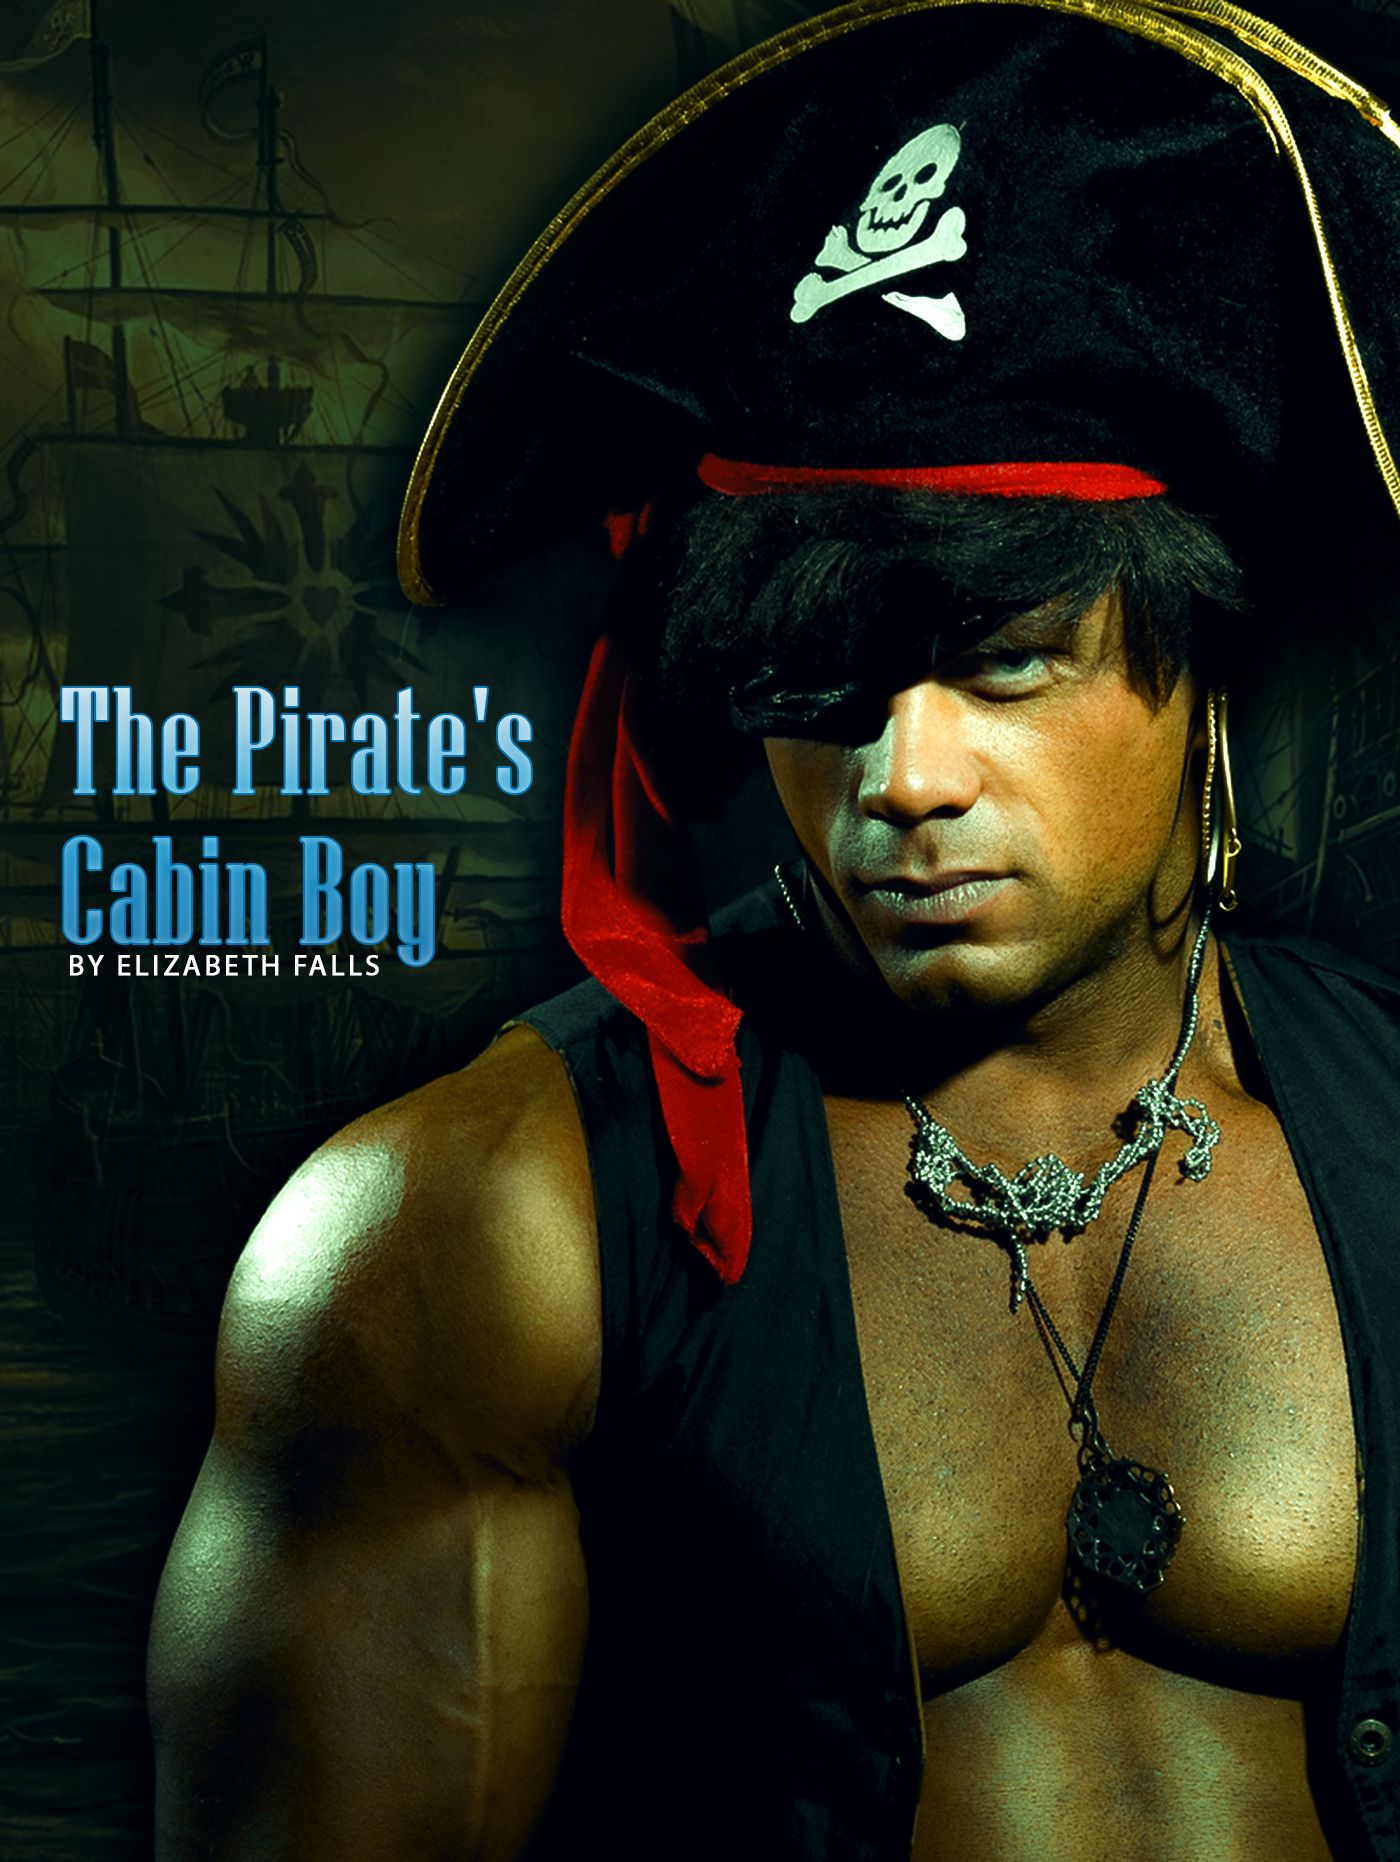 Bdsm Rough Forced Sex - The Pirateâ€™s Cabin Boy (Reluctant Rough First Time Gay Sex Forced BDSM), an  Ebook by Elizabeth Falls